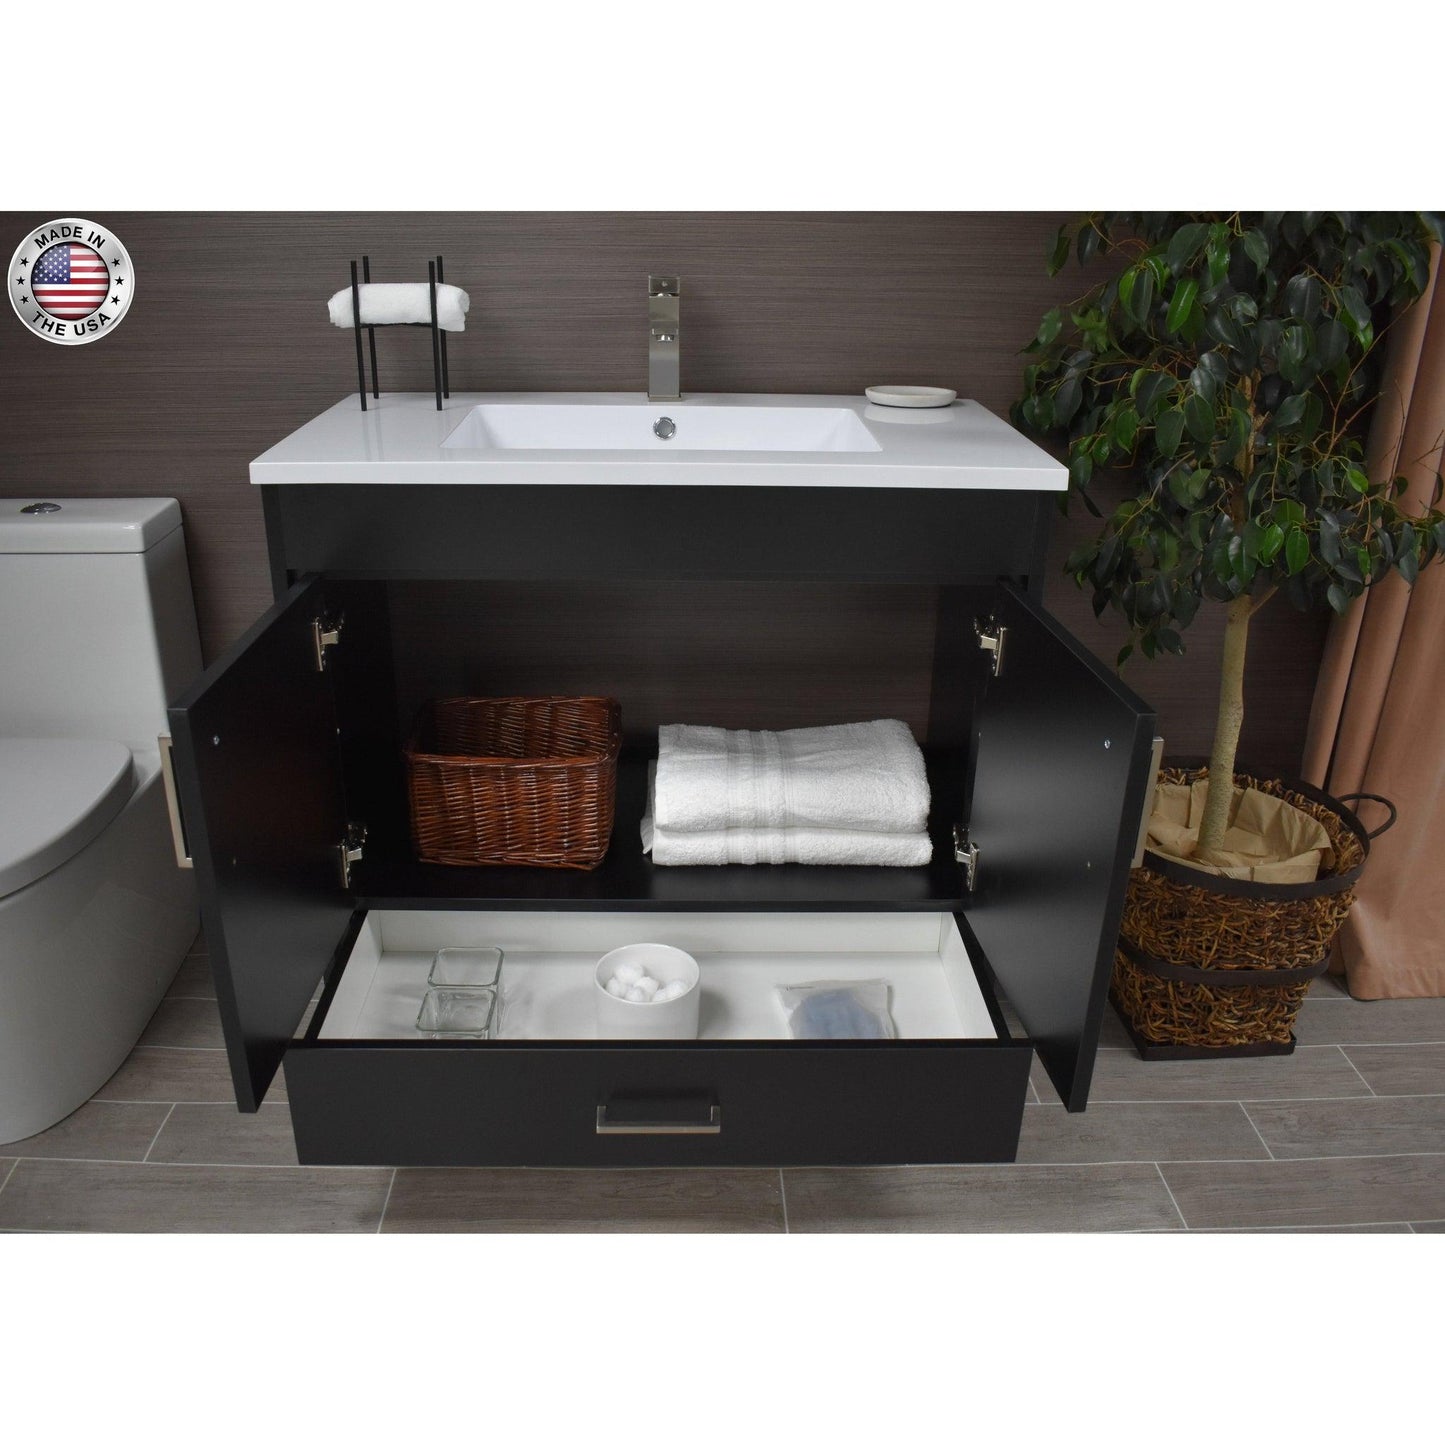 Volpa USA Rio 36" Black Freestanding Modern Bathroom Vanity With Integrated Acrylic Top and Brushed Nickel Handles